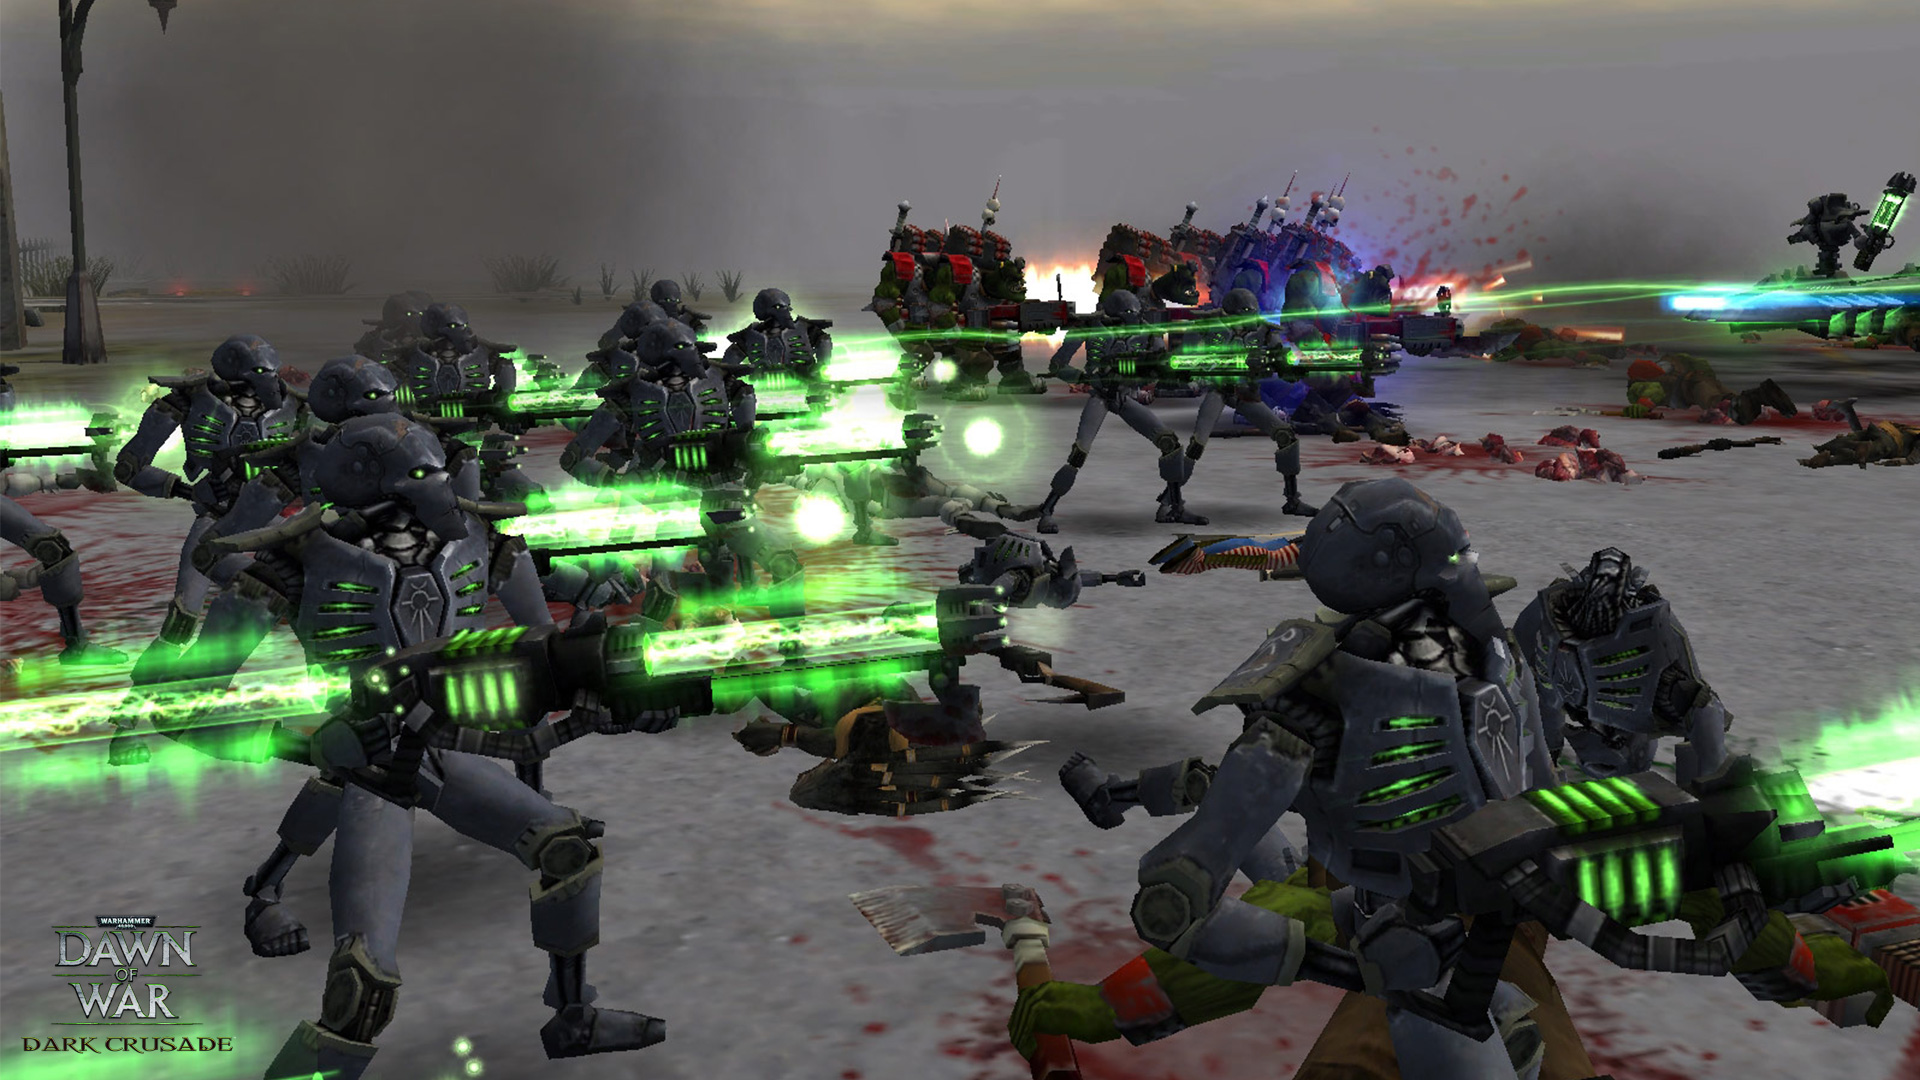 Dawn of War featured many factions from the Warhammer 40k universe.